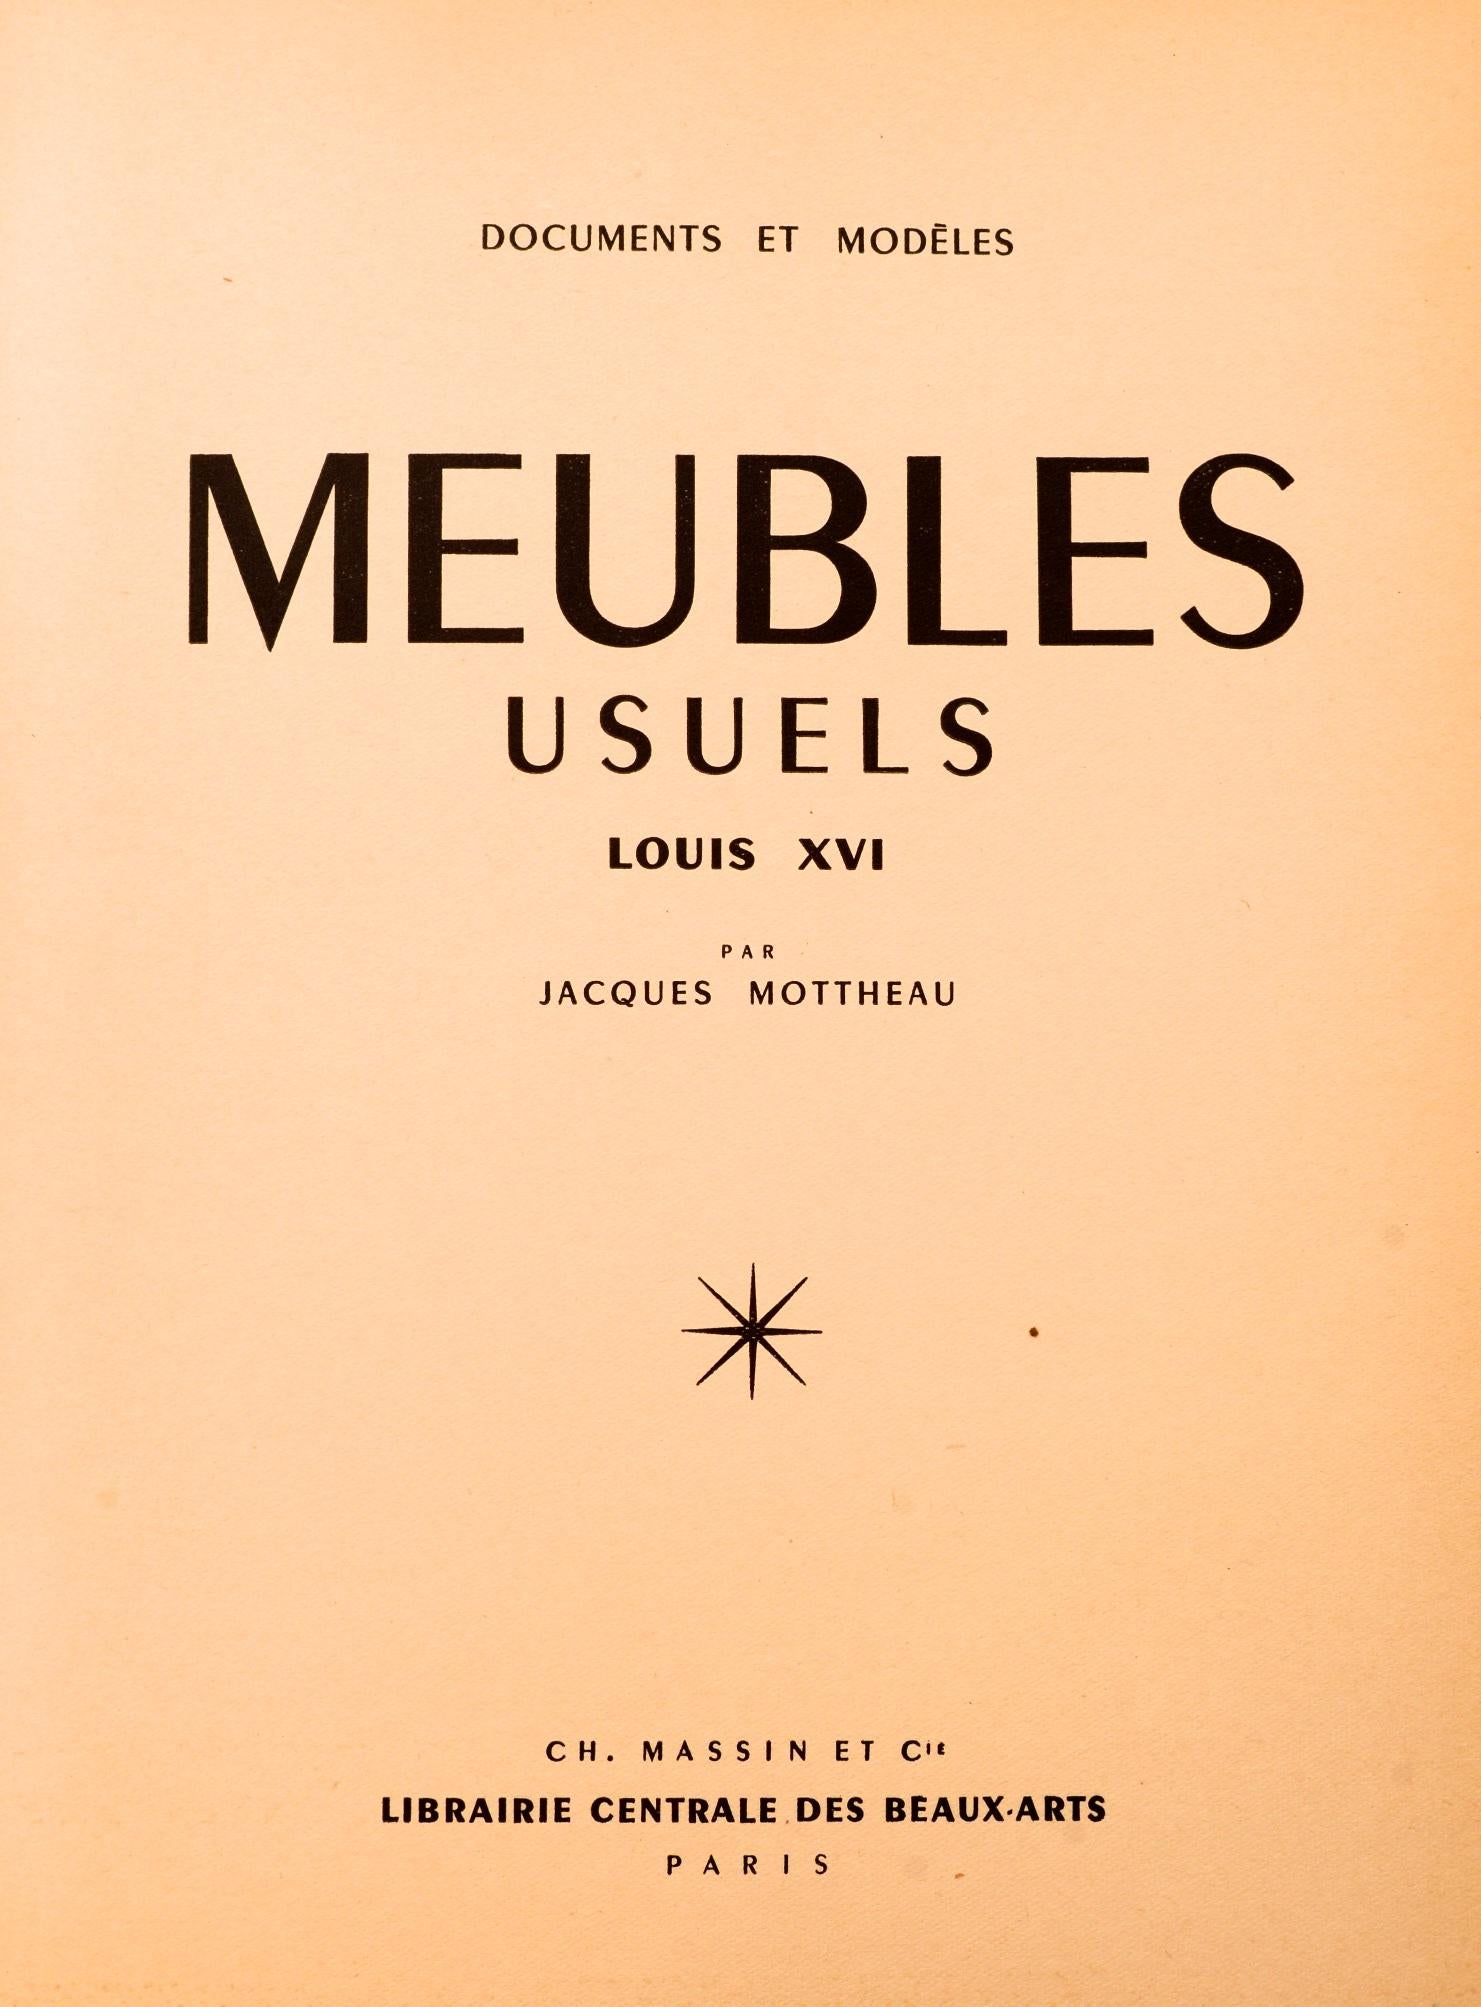 Meubles Usuels: Louis XVI by Jacques Mottheau. Libraire Centrale Des Beaux-arts, Paris, France. 36 B&W plates all printed on one sided heavy stock. One page of French text, balance is photos.
   